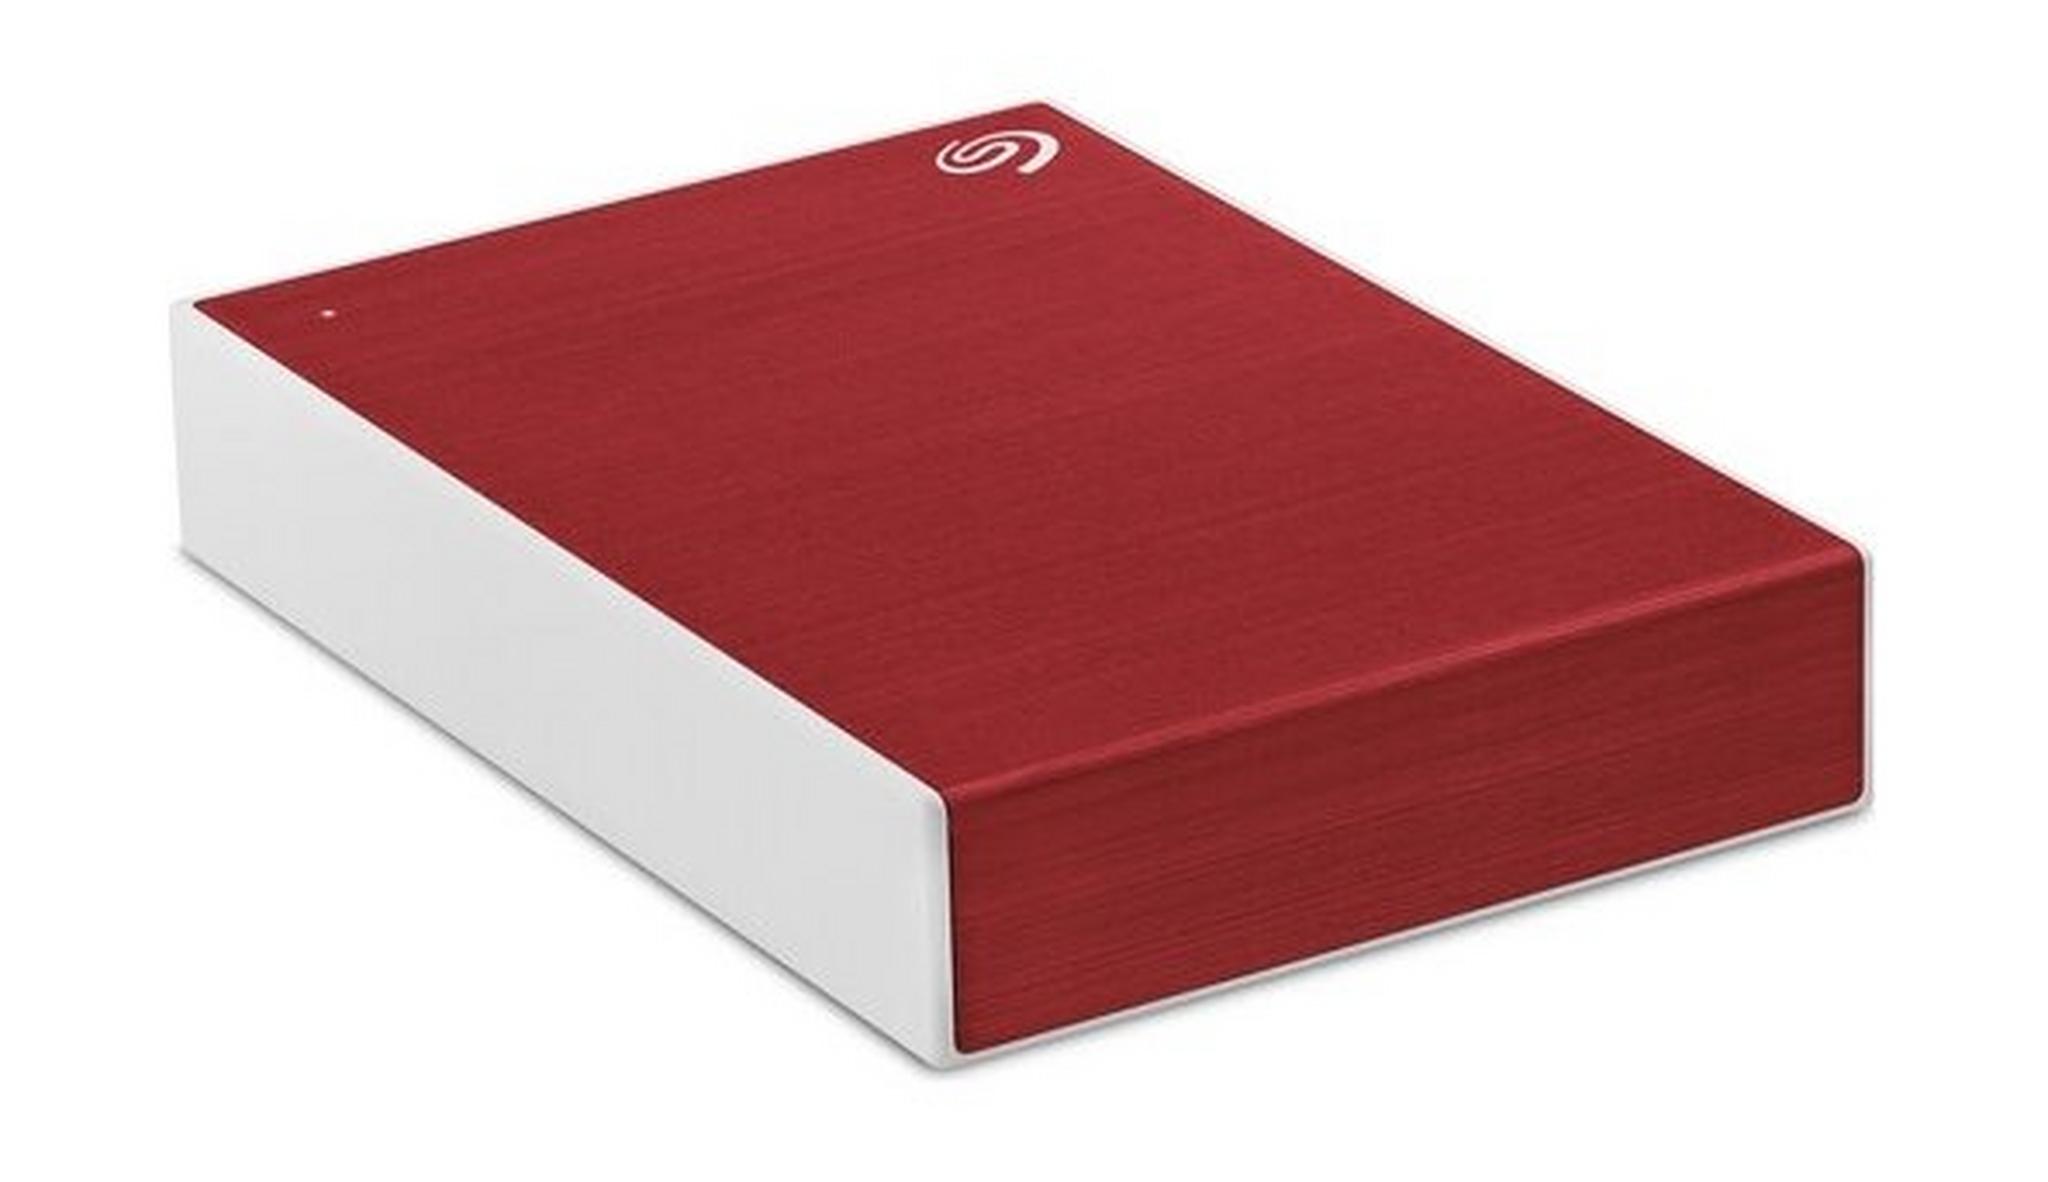 Seagate One Touch 4TB USB 3.2 Gen 1 External Hard Drive - Red